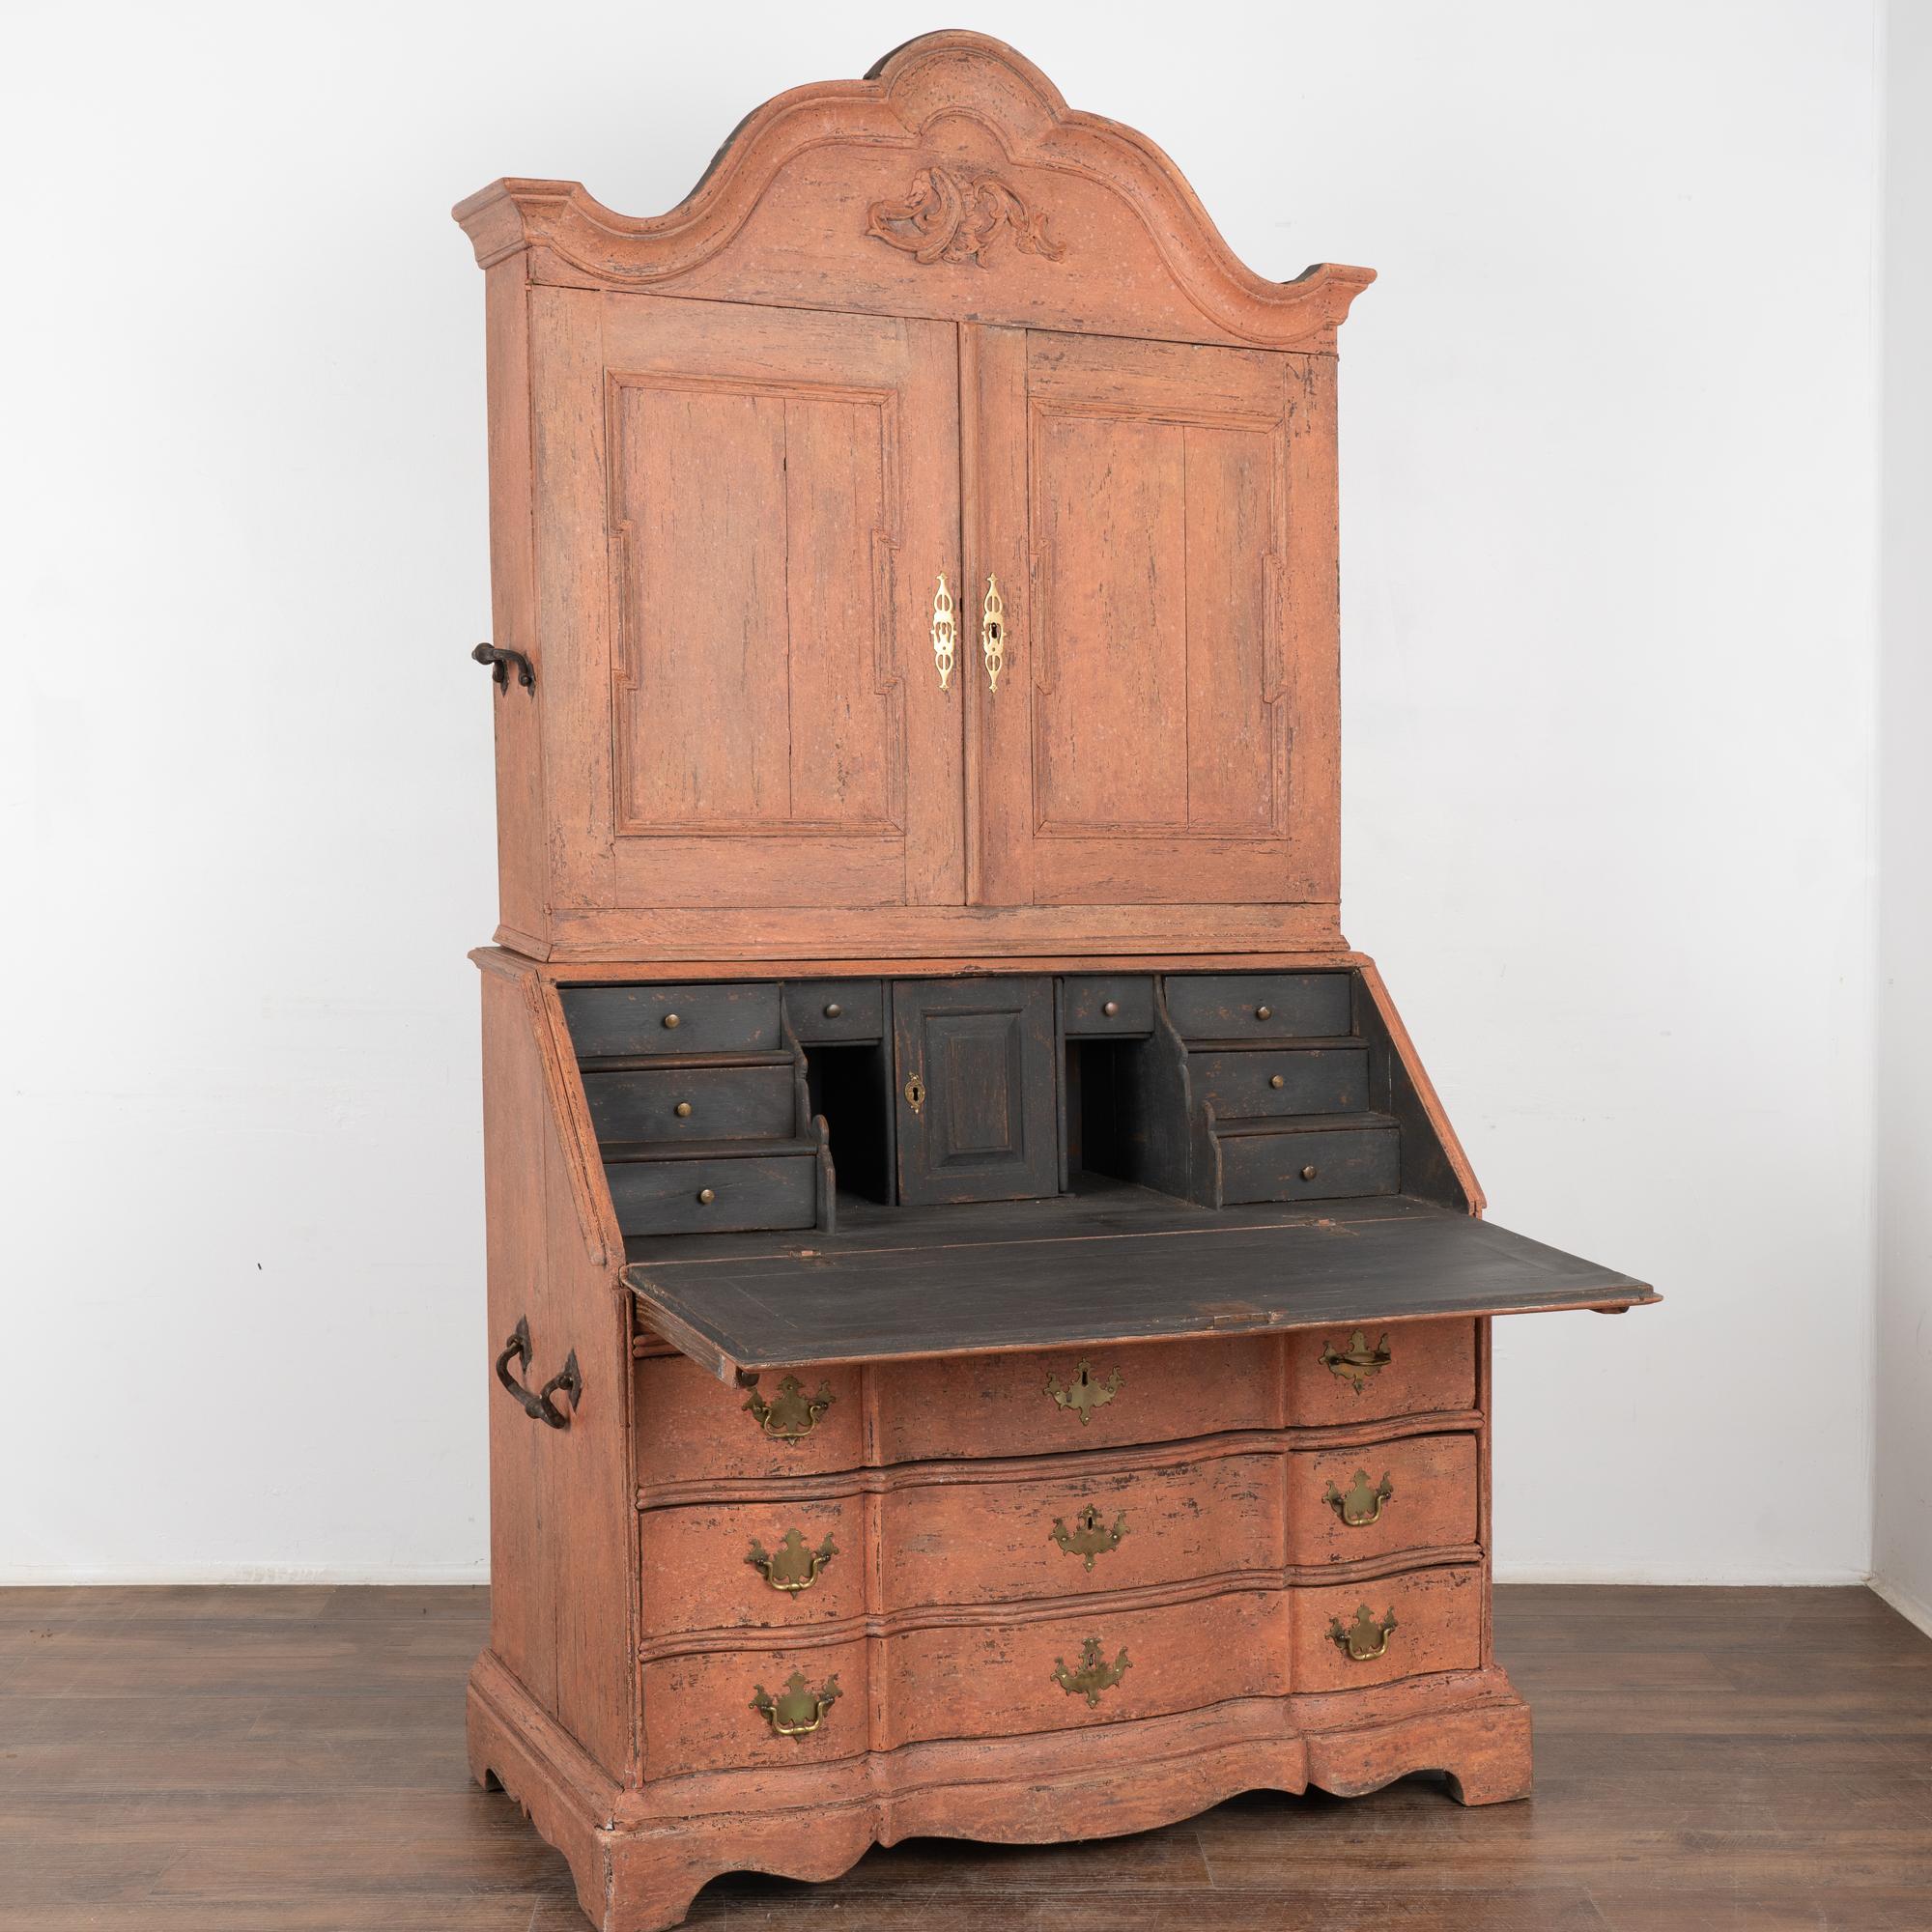 This striking oak secretary is an elegant statement piece crowned with a beautifully curved and carved bonnet or crown.
The entire secretary has been given a professional custom layered salmon/desert pink painted finish which has been gently